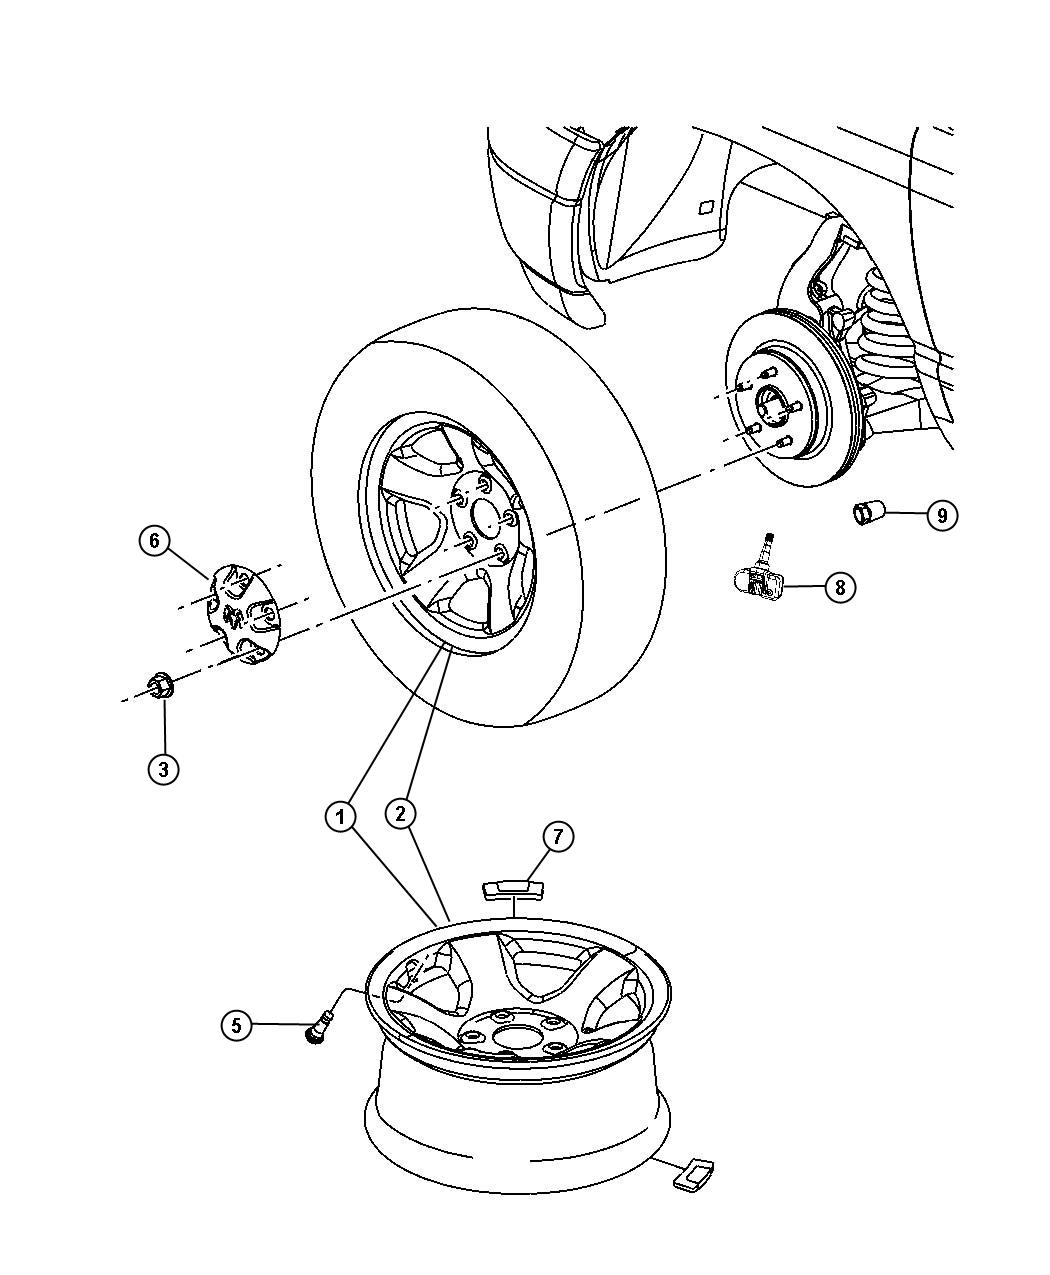 Wheels and Hardware. Diagram